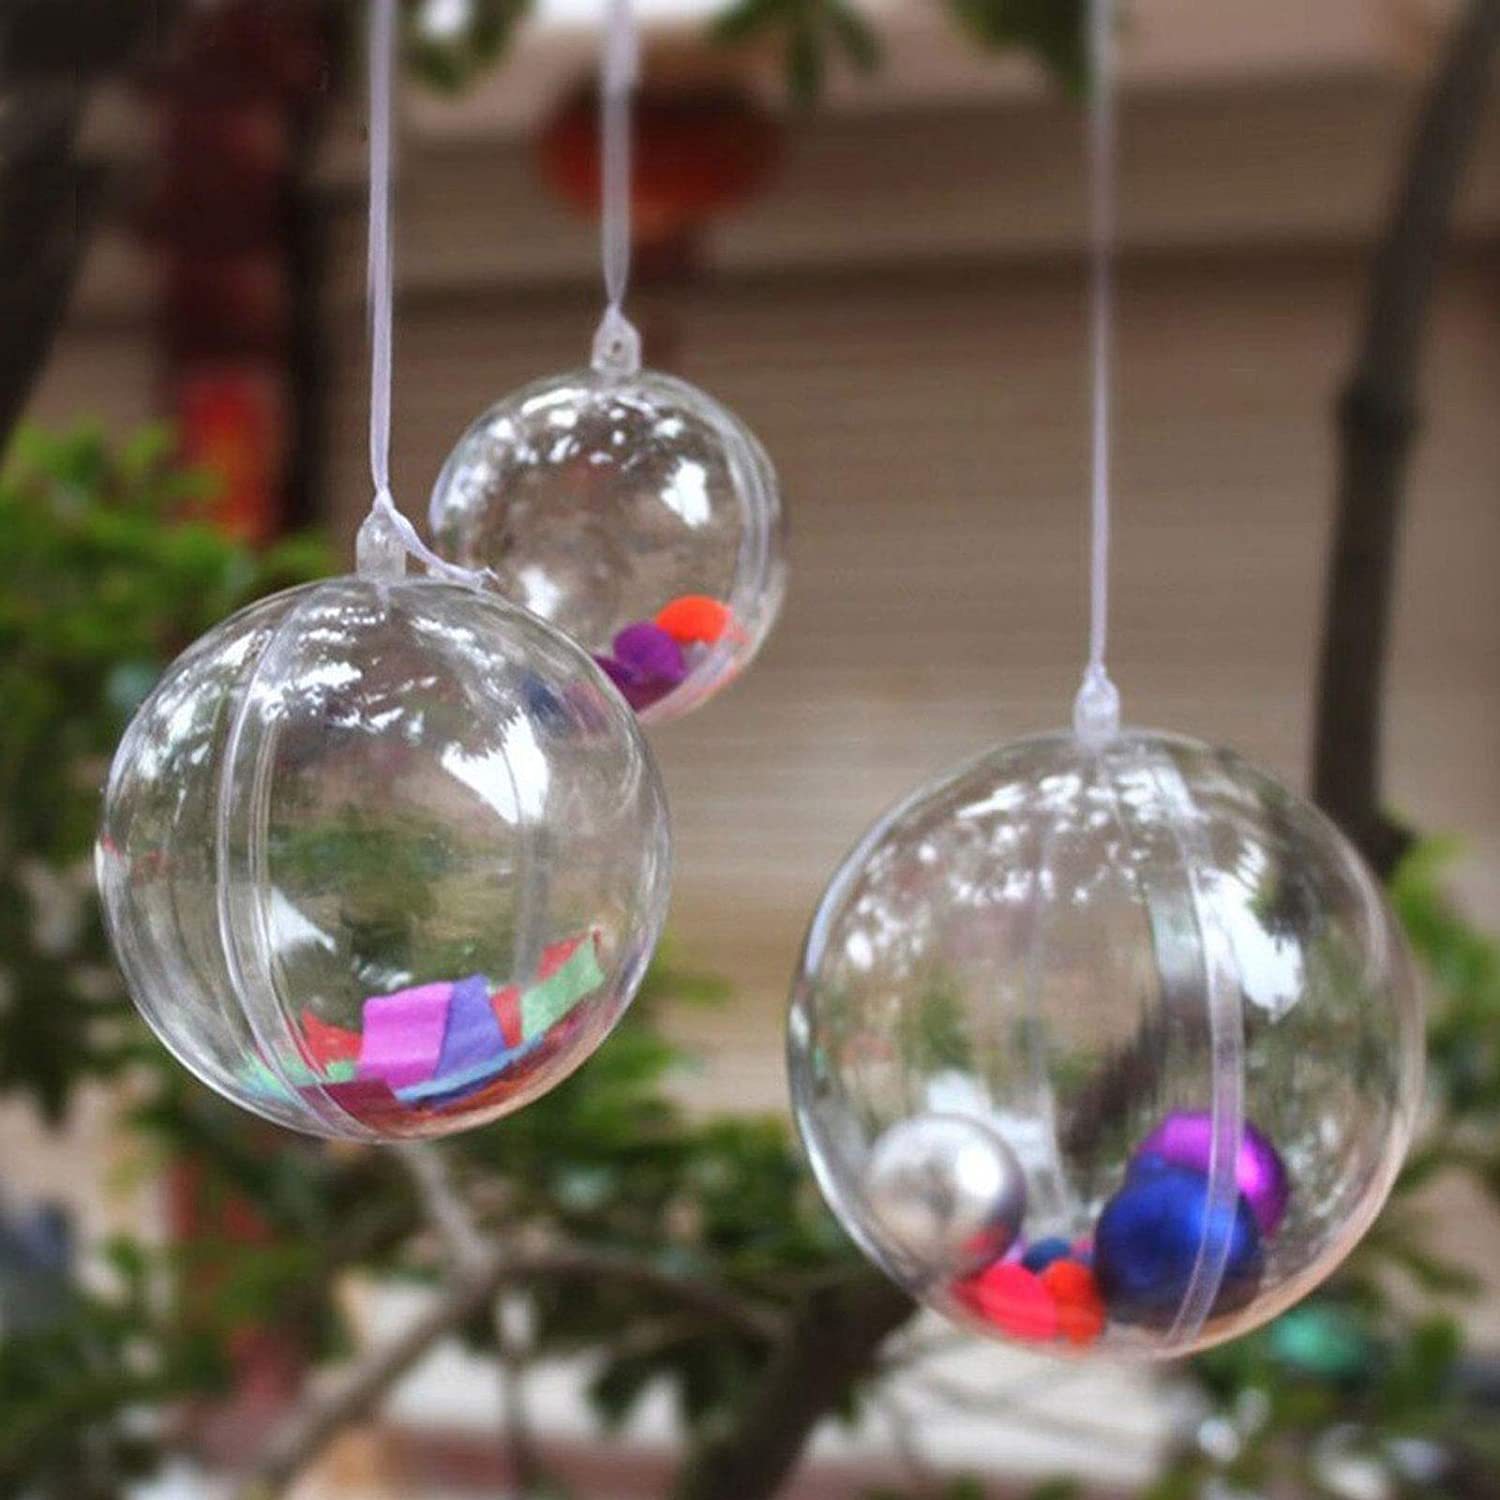 10 Pcs Christmas Transparent Ball Plastic Fillable Bauble Xmas Tree Hanging Ornaments Decoration for Home Wedding Party Gift Box